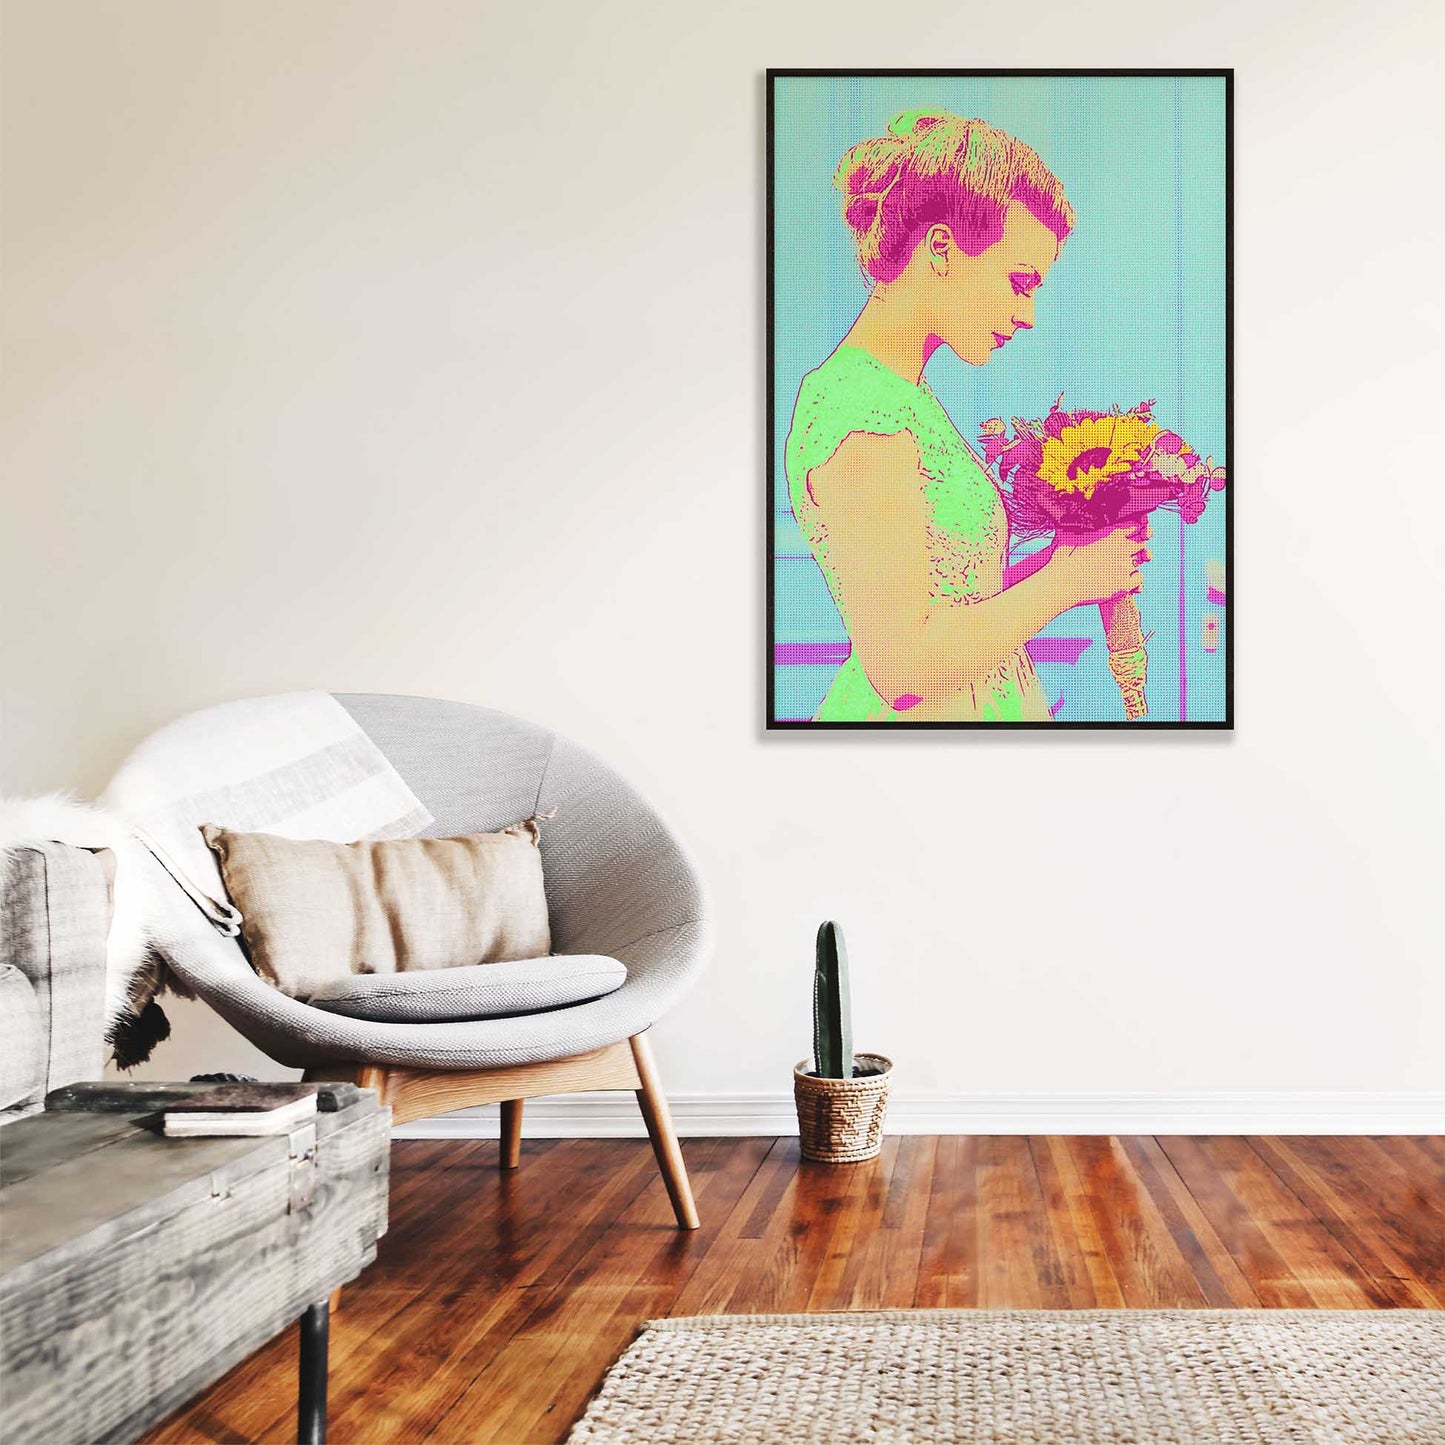 Unleash your creativity with a Personalised Green & Pink Pop Art Framed Print from your photo. Its vibrant colors and fun-filled composition bring joy and excitement to your walls. Made with thick museum-quality paper and framed in natural 